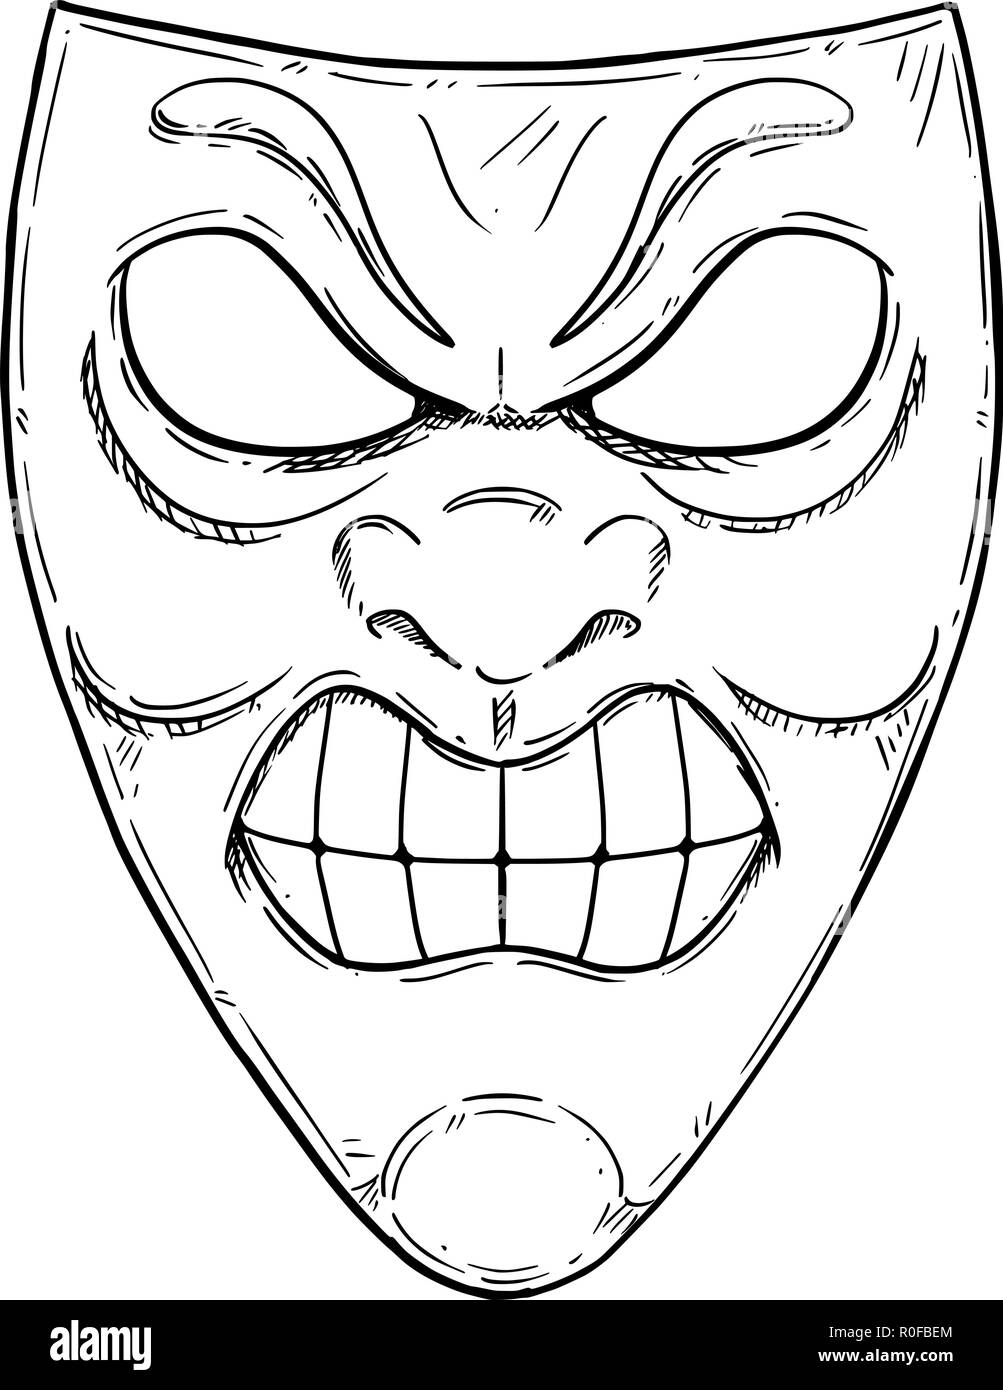 Vector Artistic Drawing Illustration of Angry Aggressive Comedy Mask Stock Vector